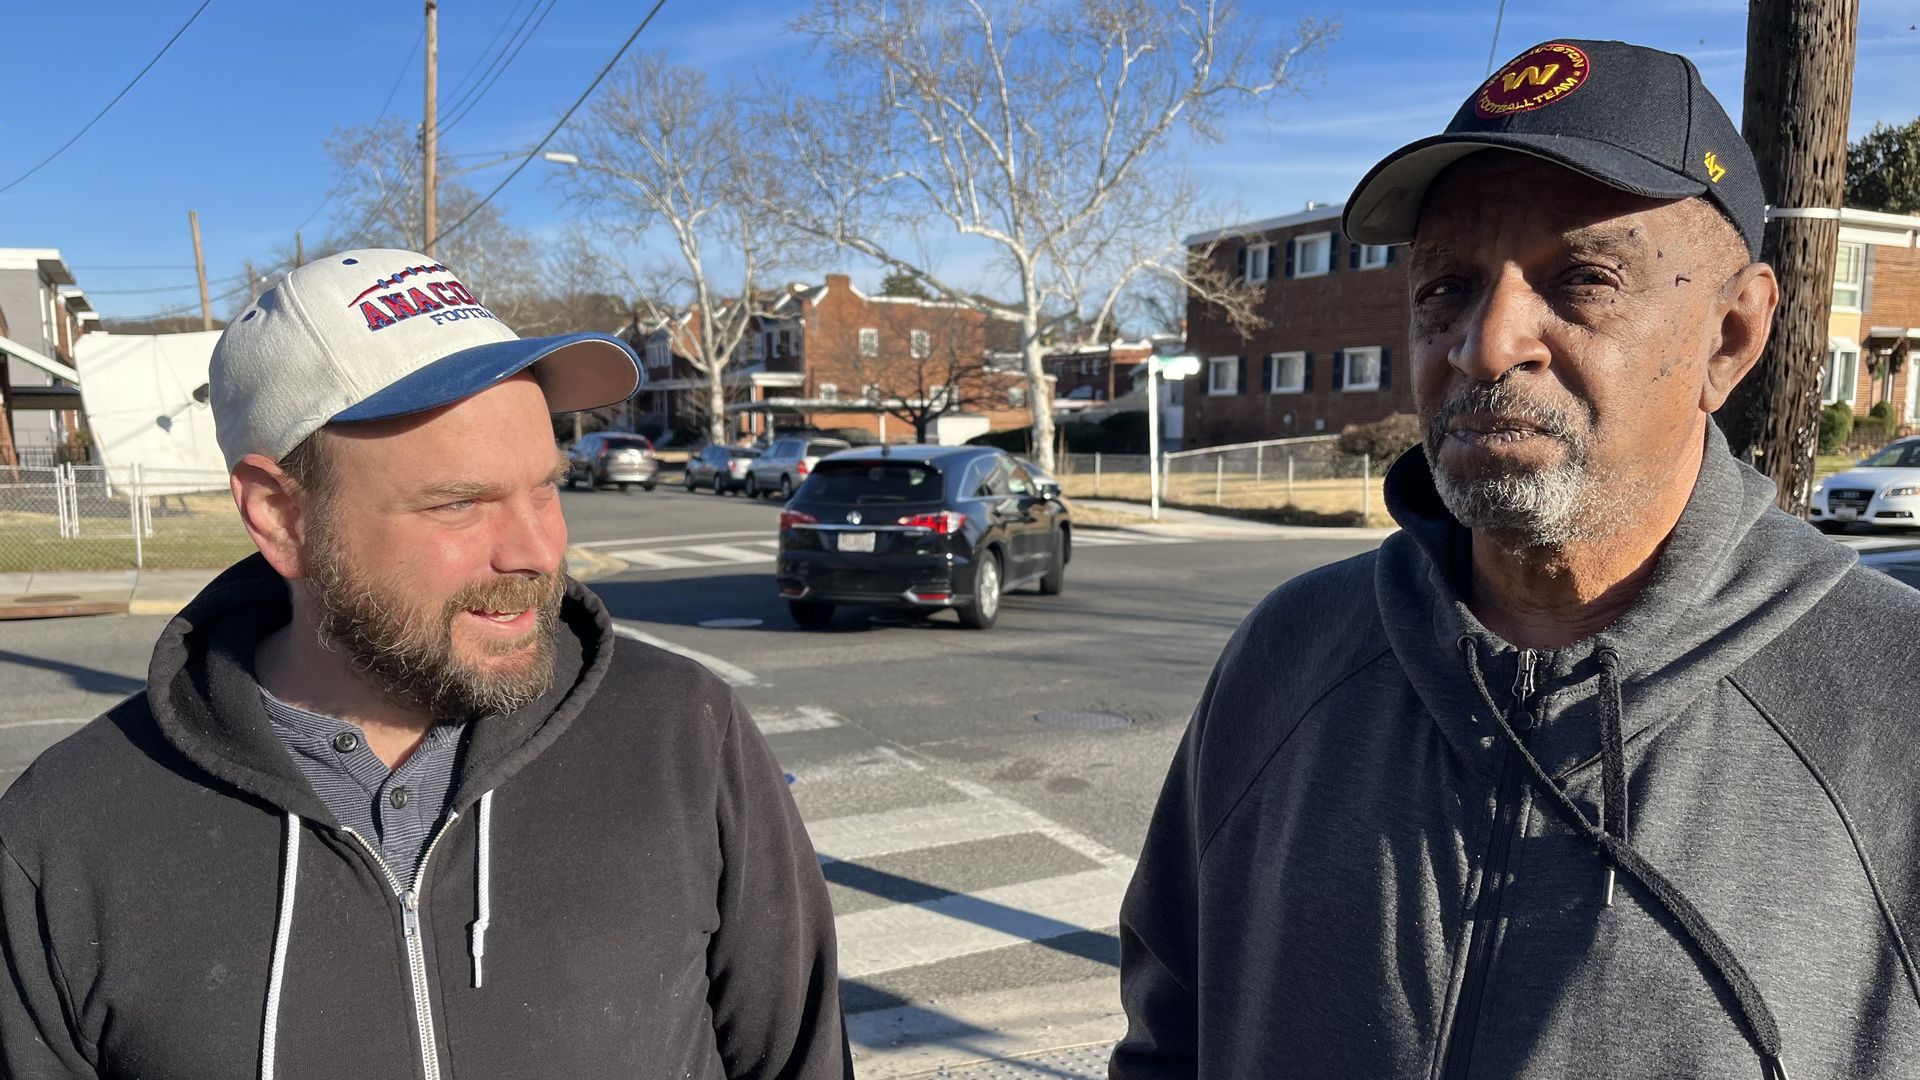 D.C. residents Nathan Luecking and Charles Lockett stand together on a front yard, with an intersection in the background. 